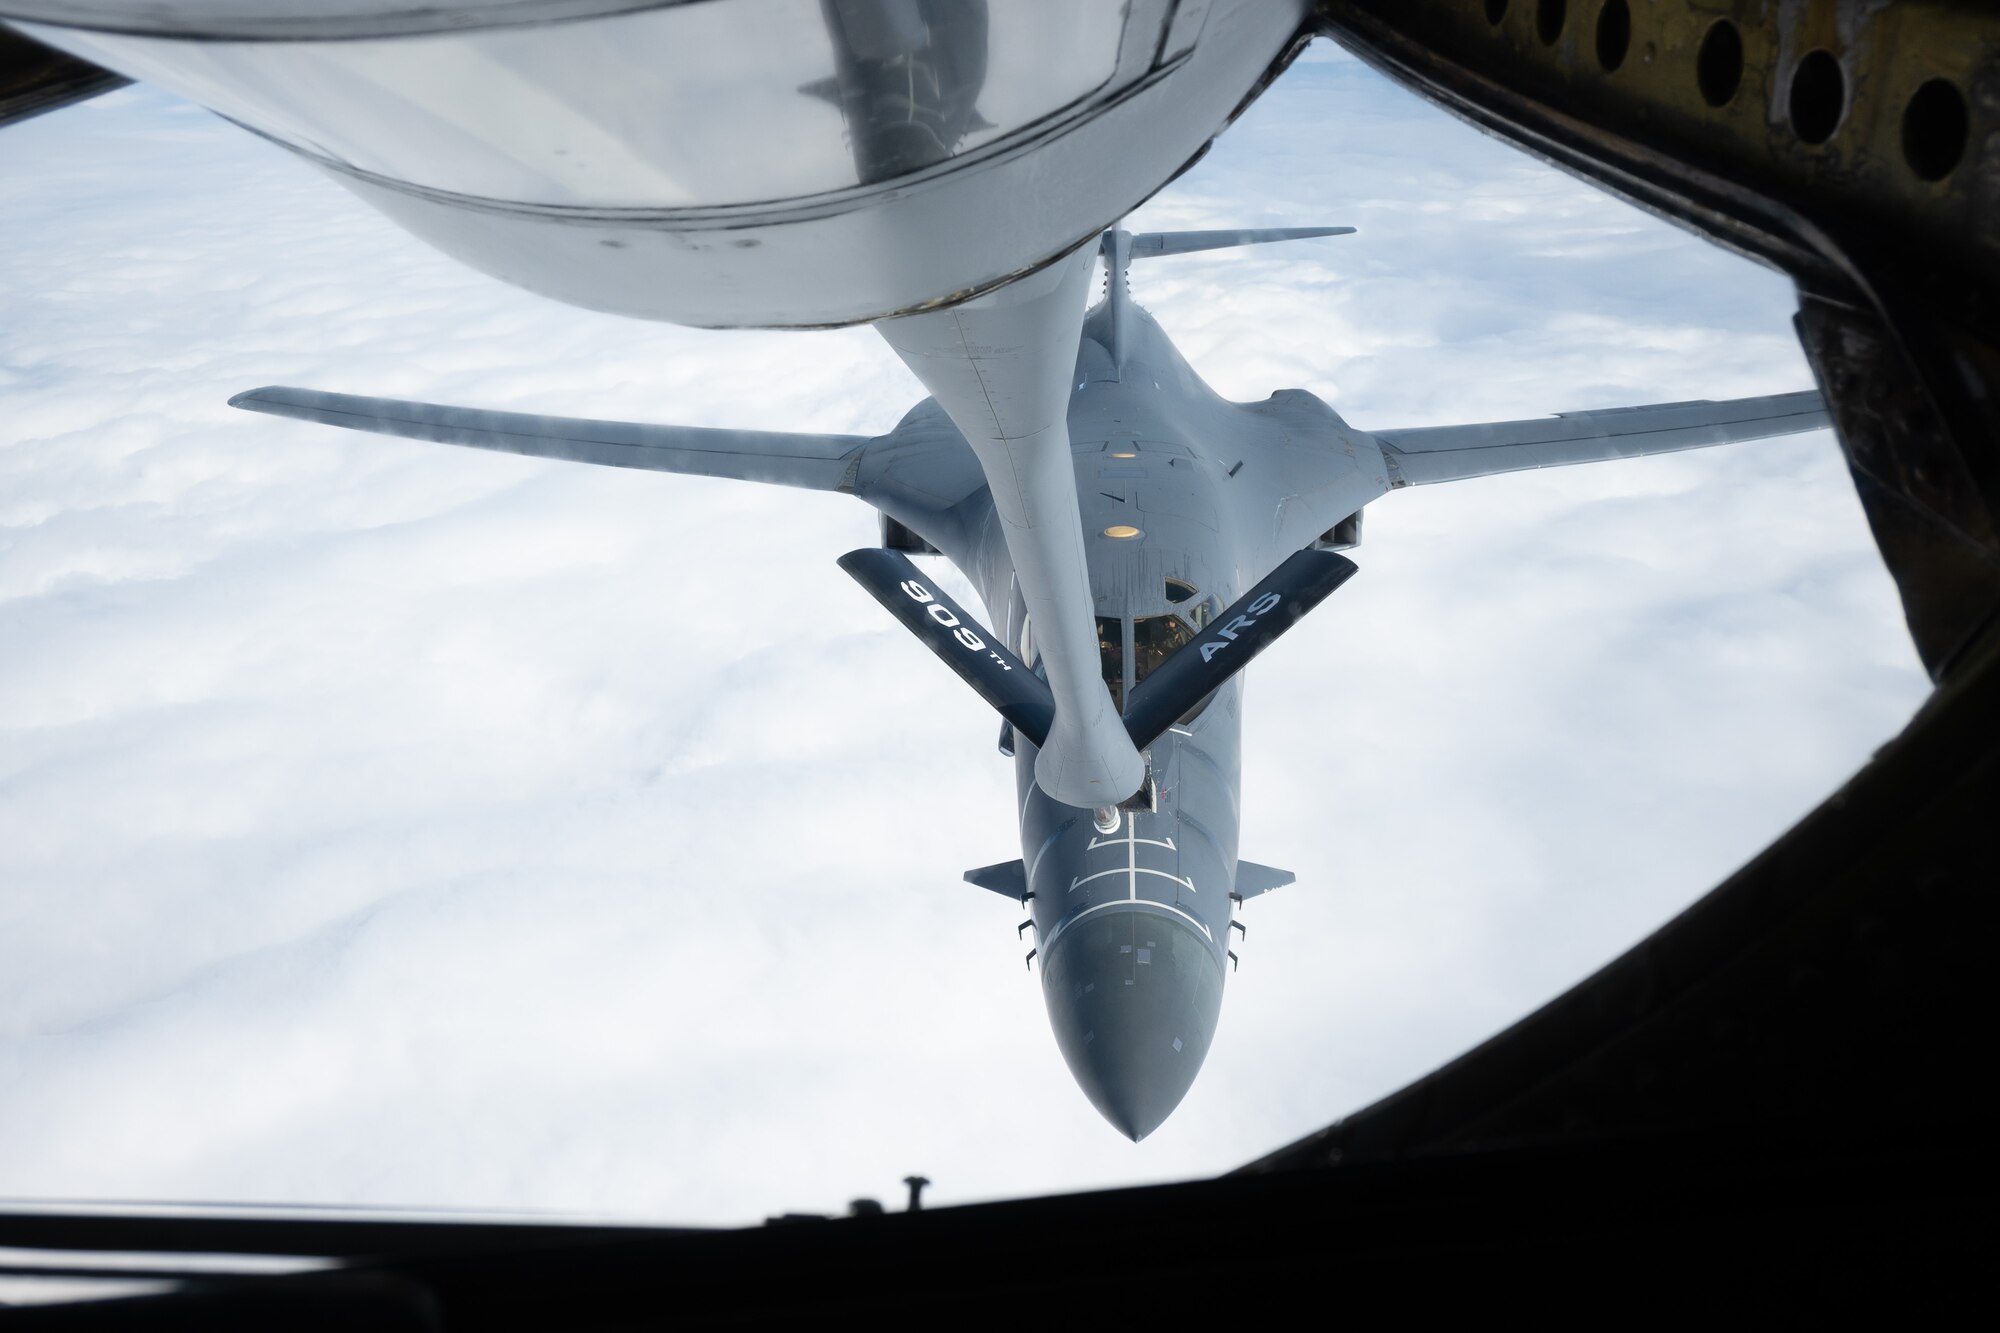 Aircraft approaches another aircraft for mid-flight refueling